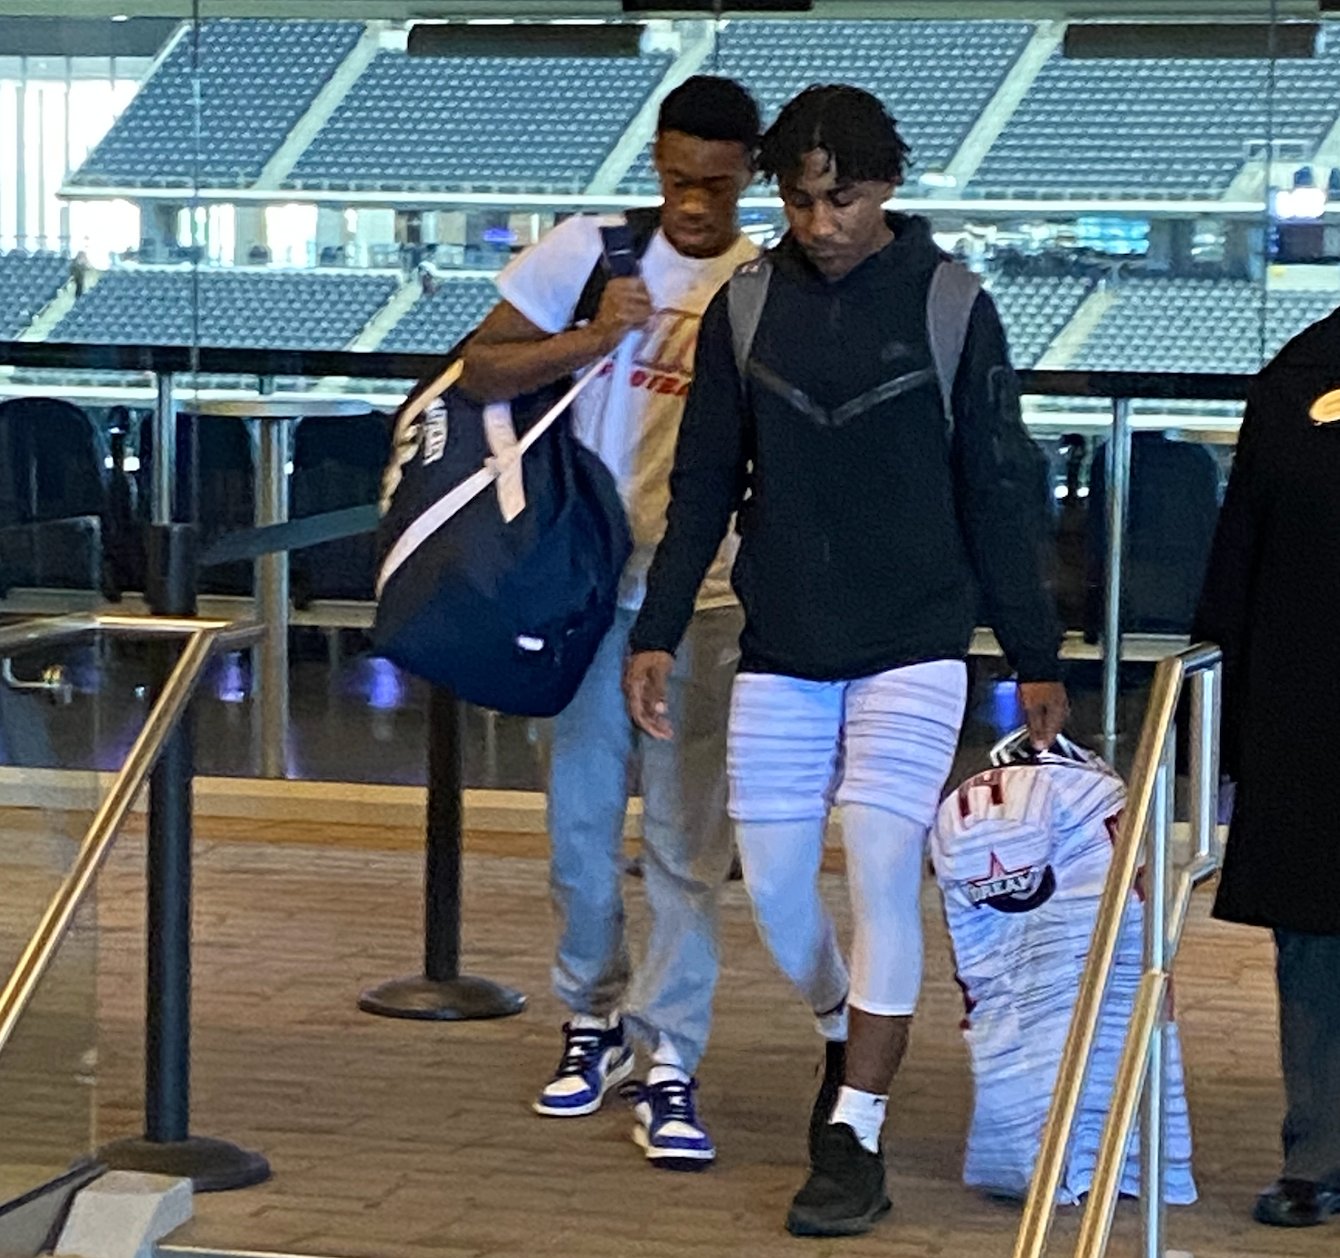 Justin Bloise and Makai Bodden enter AT&T Stadium in Dallas.